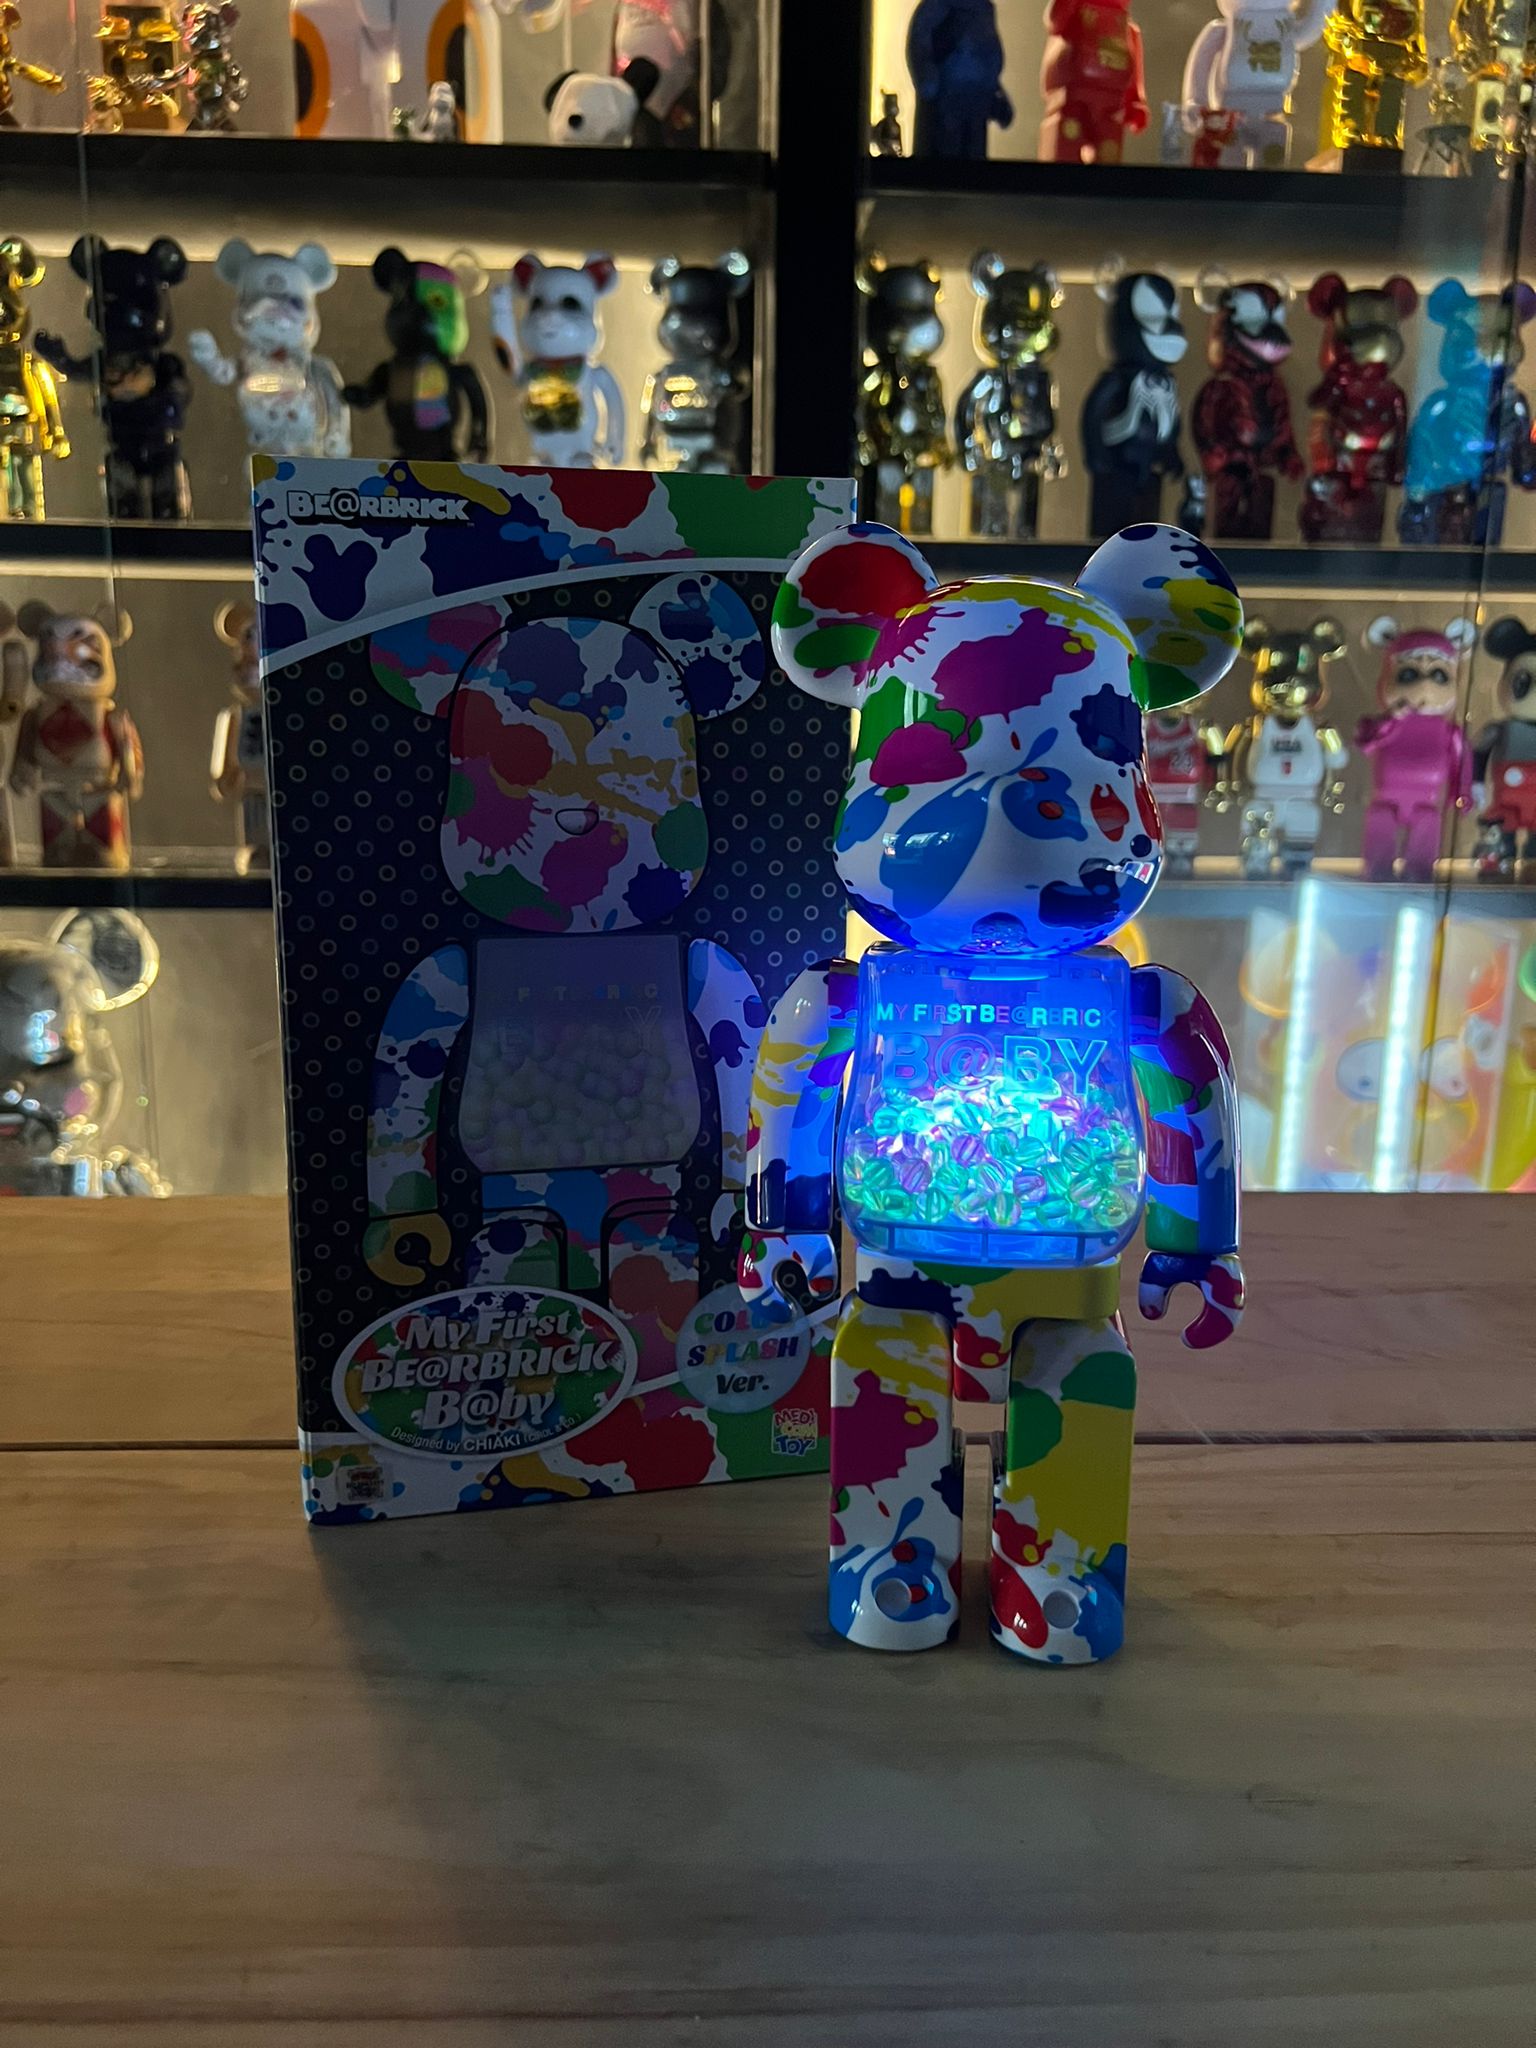 MY FIRST BE@RBRICK B@BY COLOR SPLASH 400 - その他